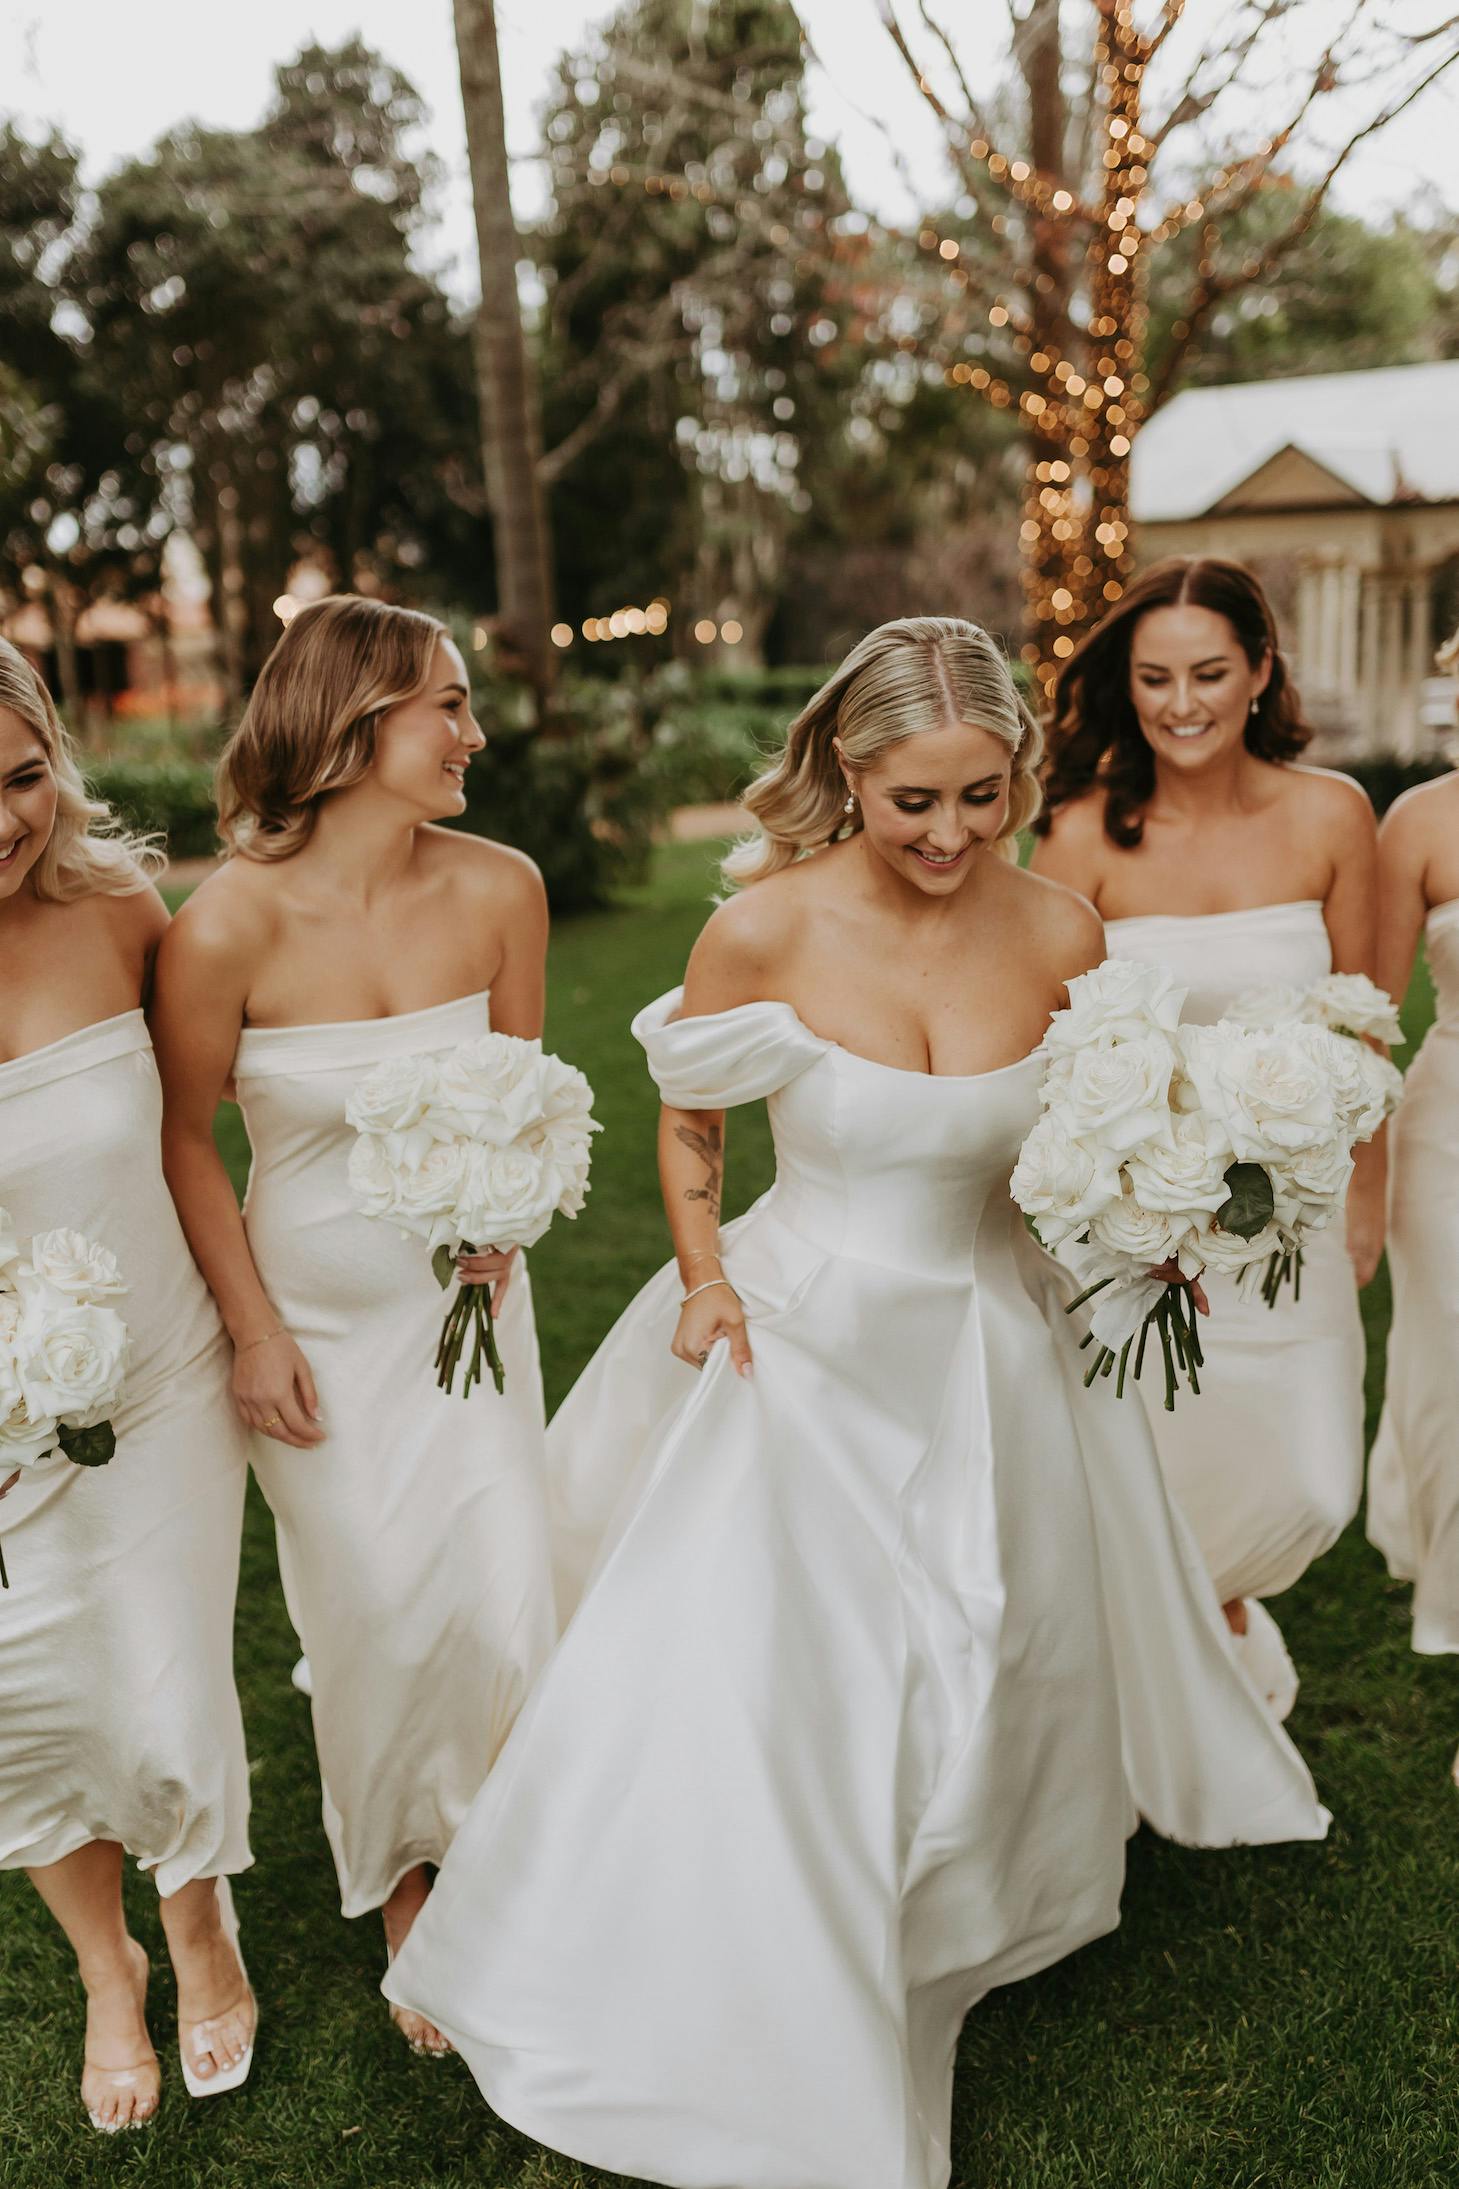 A bride in a white off-the-shoulder wedding dress walks on grass with her bridesmaids, who are also wearing white off-the-shoulder dresses. All are holding white rose bouquets. The background features trees and soft lighting.